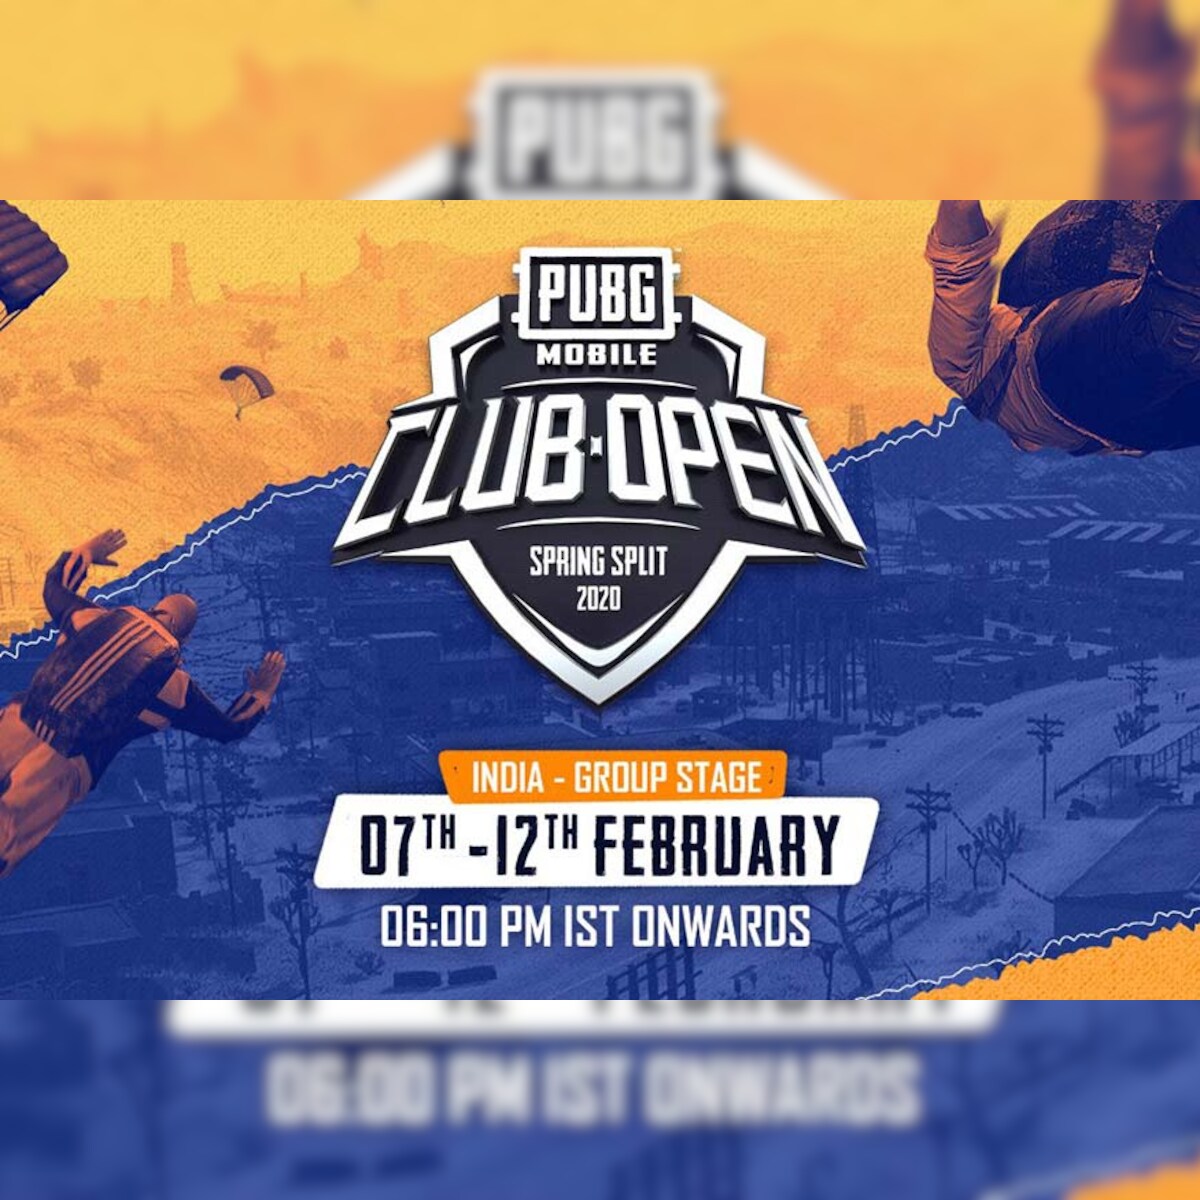 PUBG Mobile Club Open 2020: India Group Stage Begins Today at 6 PM